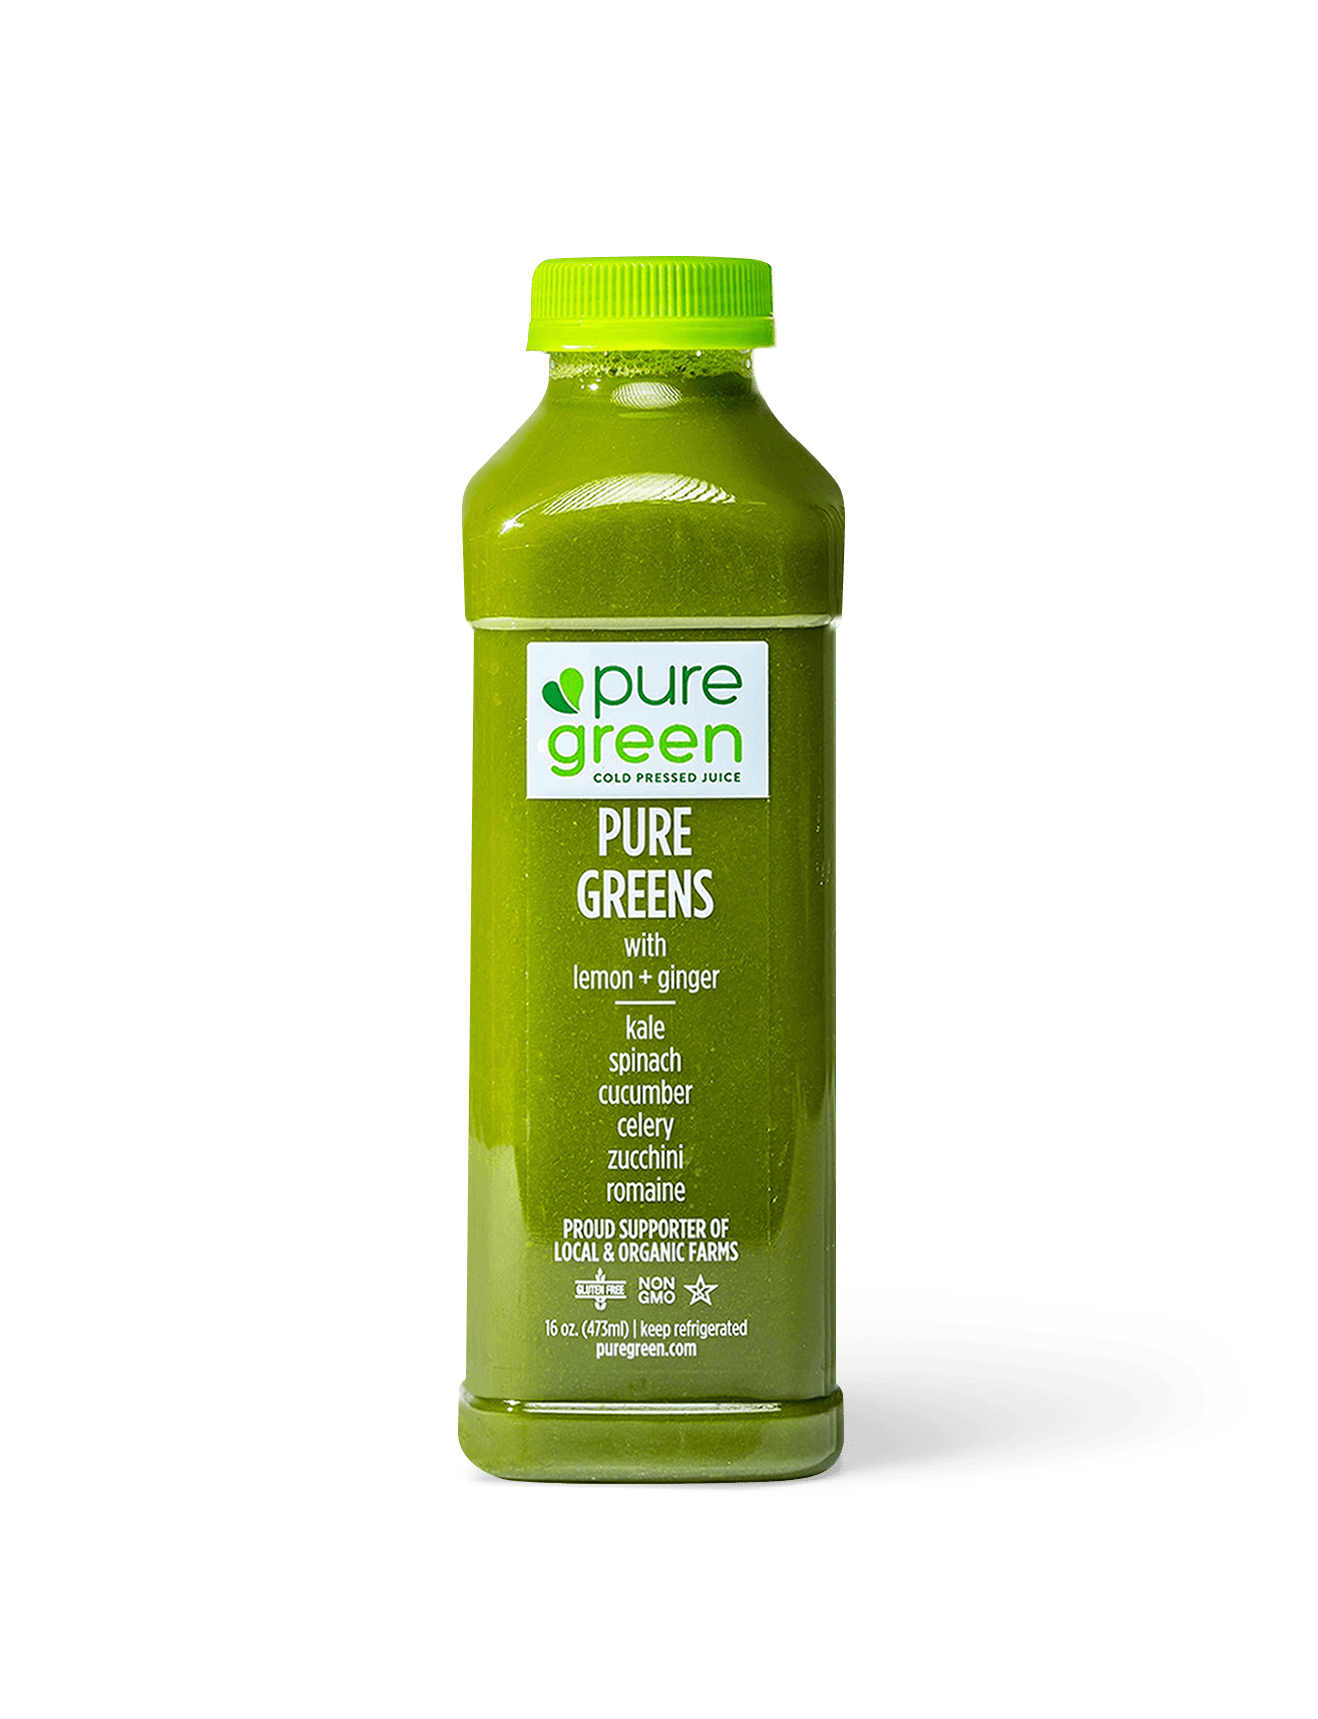 Pure Green 100% Juice, Pure Greens, with Apple Lemon + Ginger - 16 oz